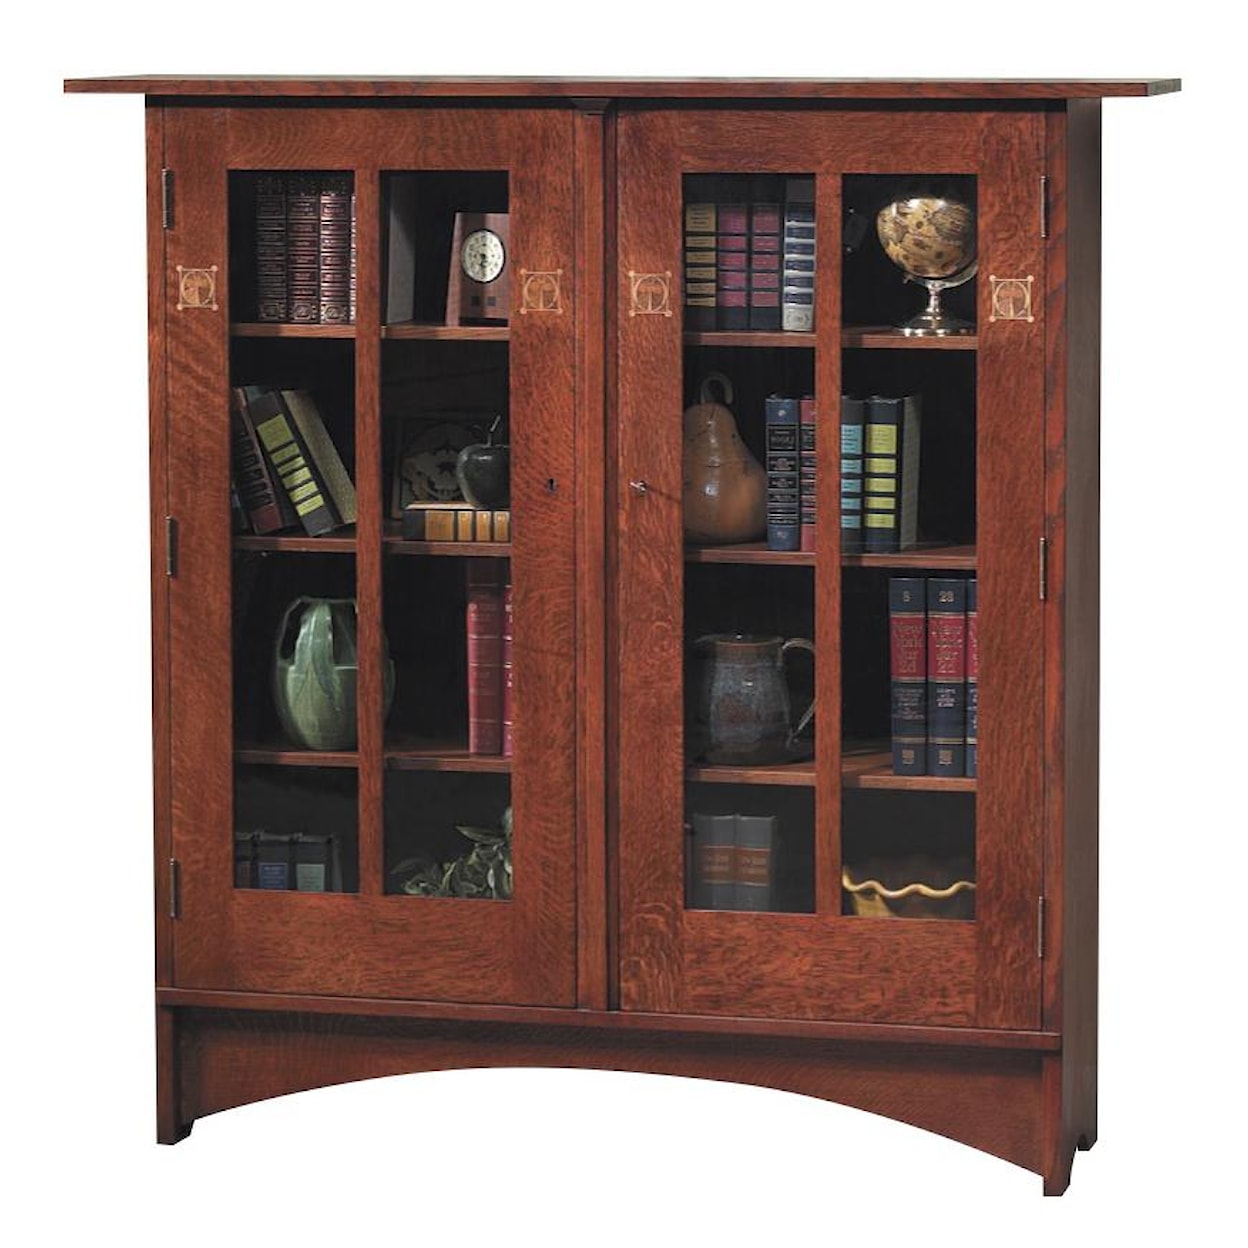 Stickley Oak Mission Classics Harvey Ellis Bookcase with Inlay